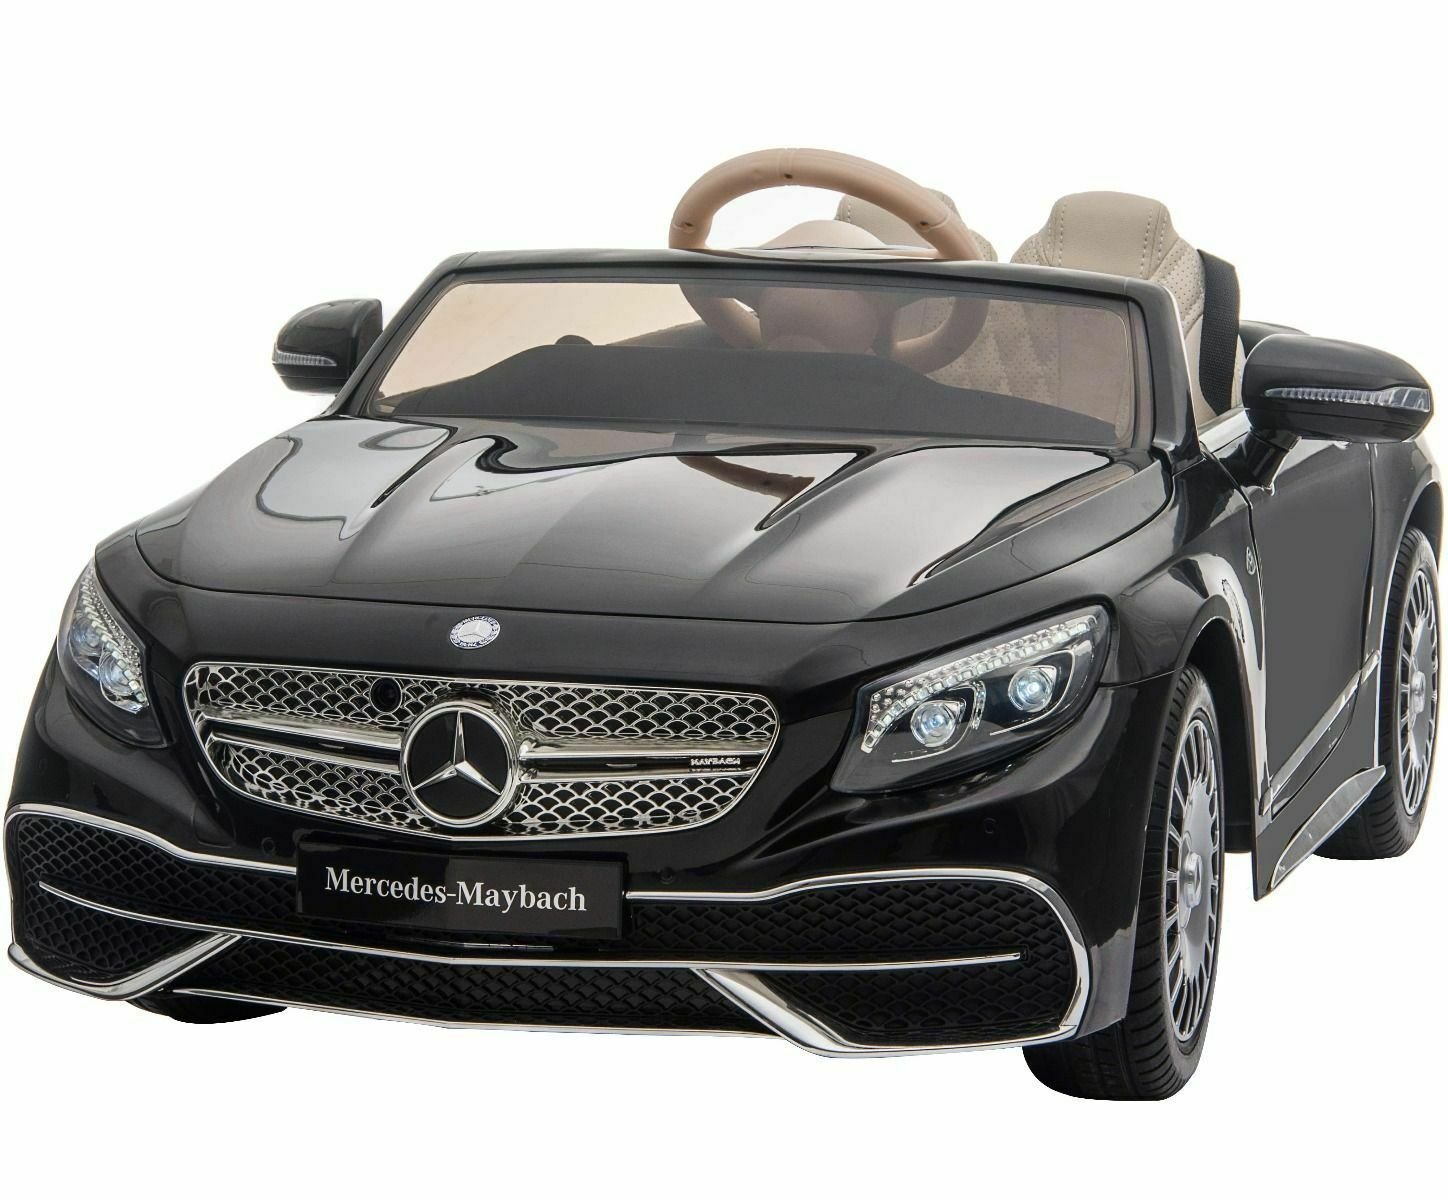 Ride On Toys 12V Electric Car Mercedes Remote Control MP3 Music MP4 Screen Black 